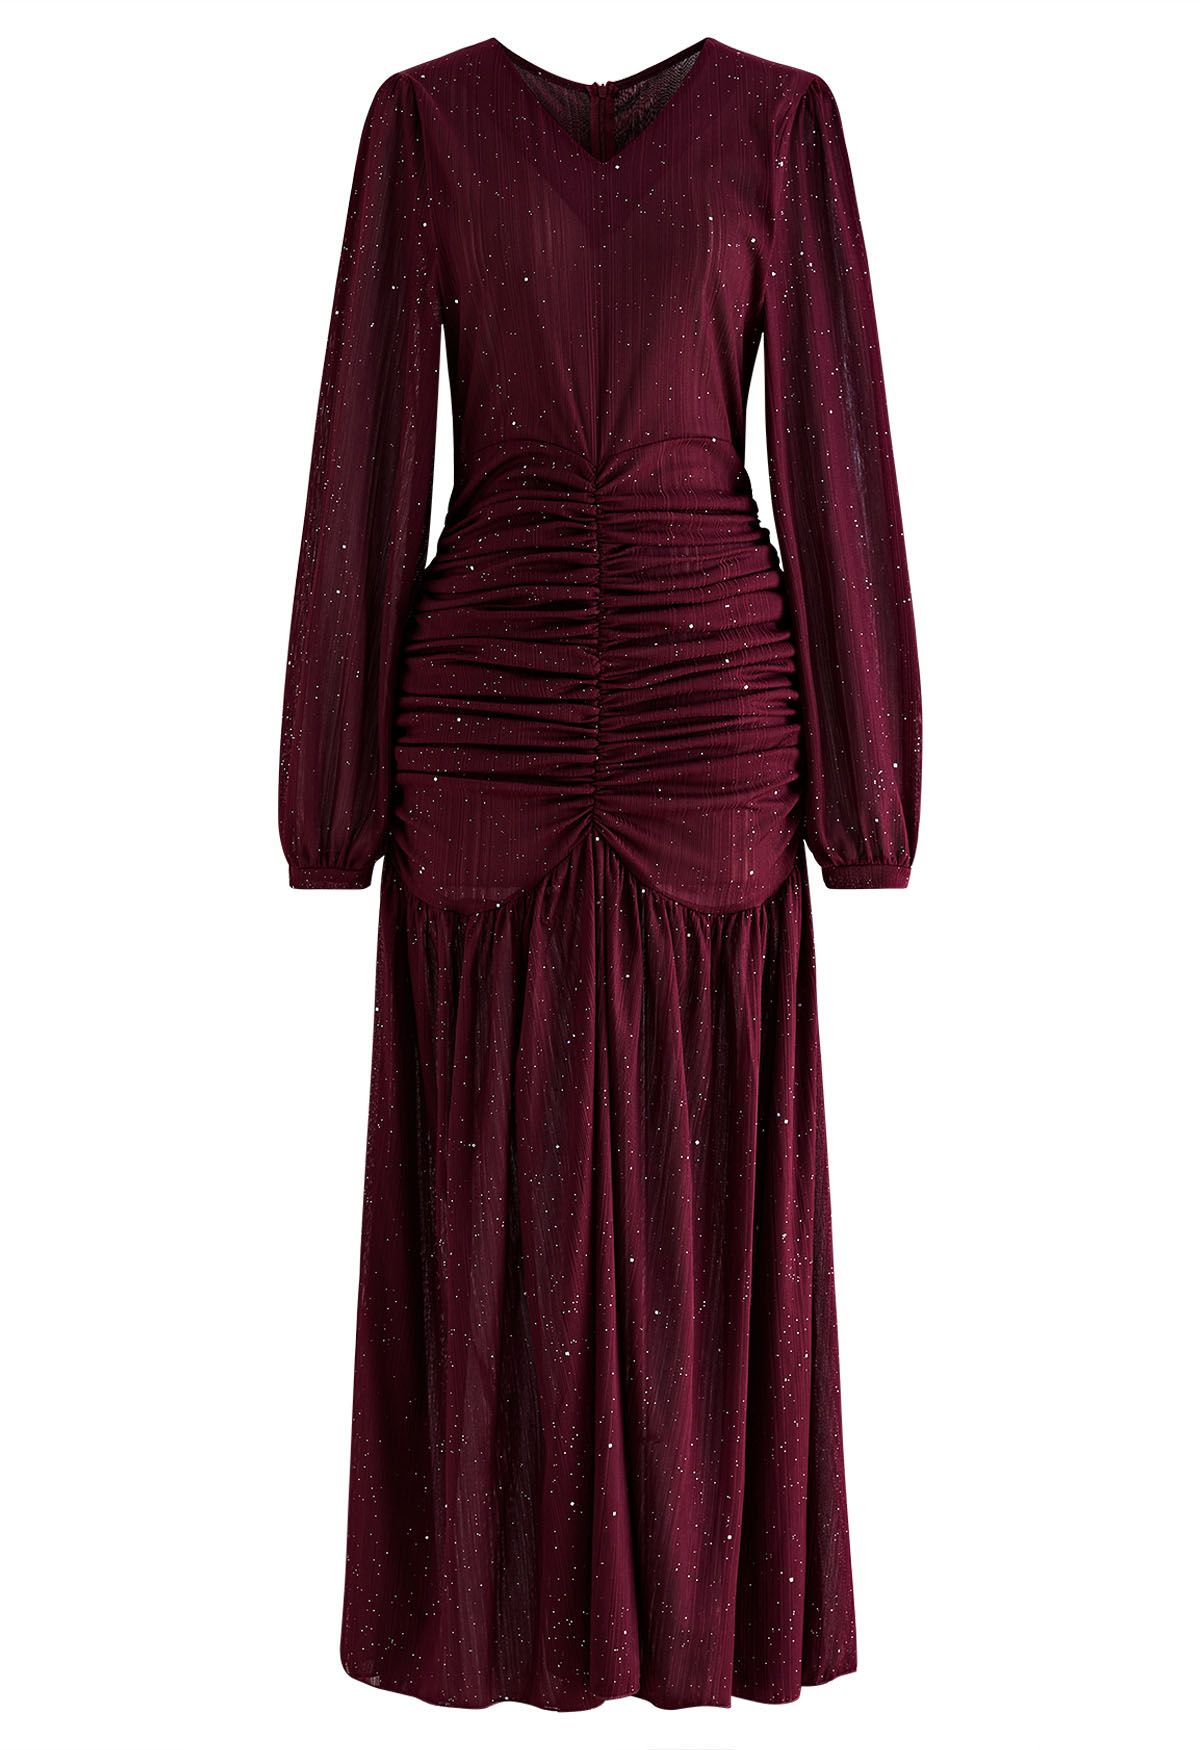 Glitter Ruched Frilling Maxi Dress in Burgundy - Retro, Indie and ...